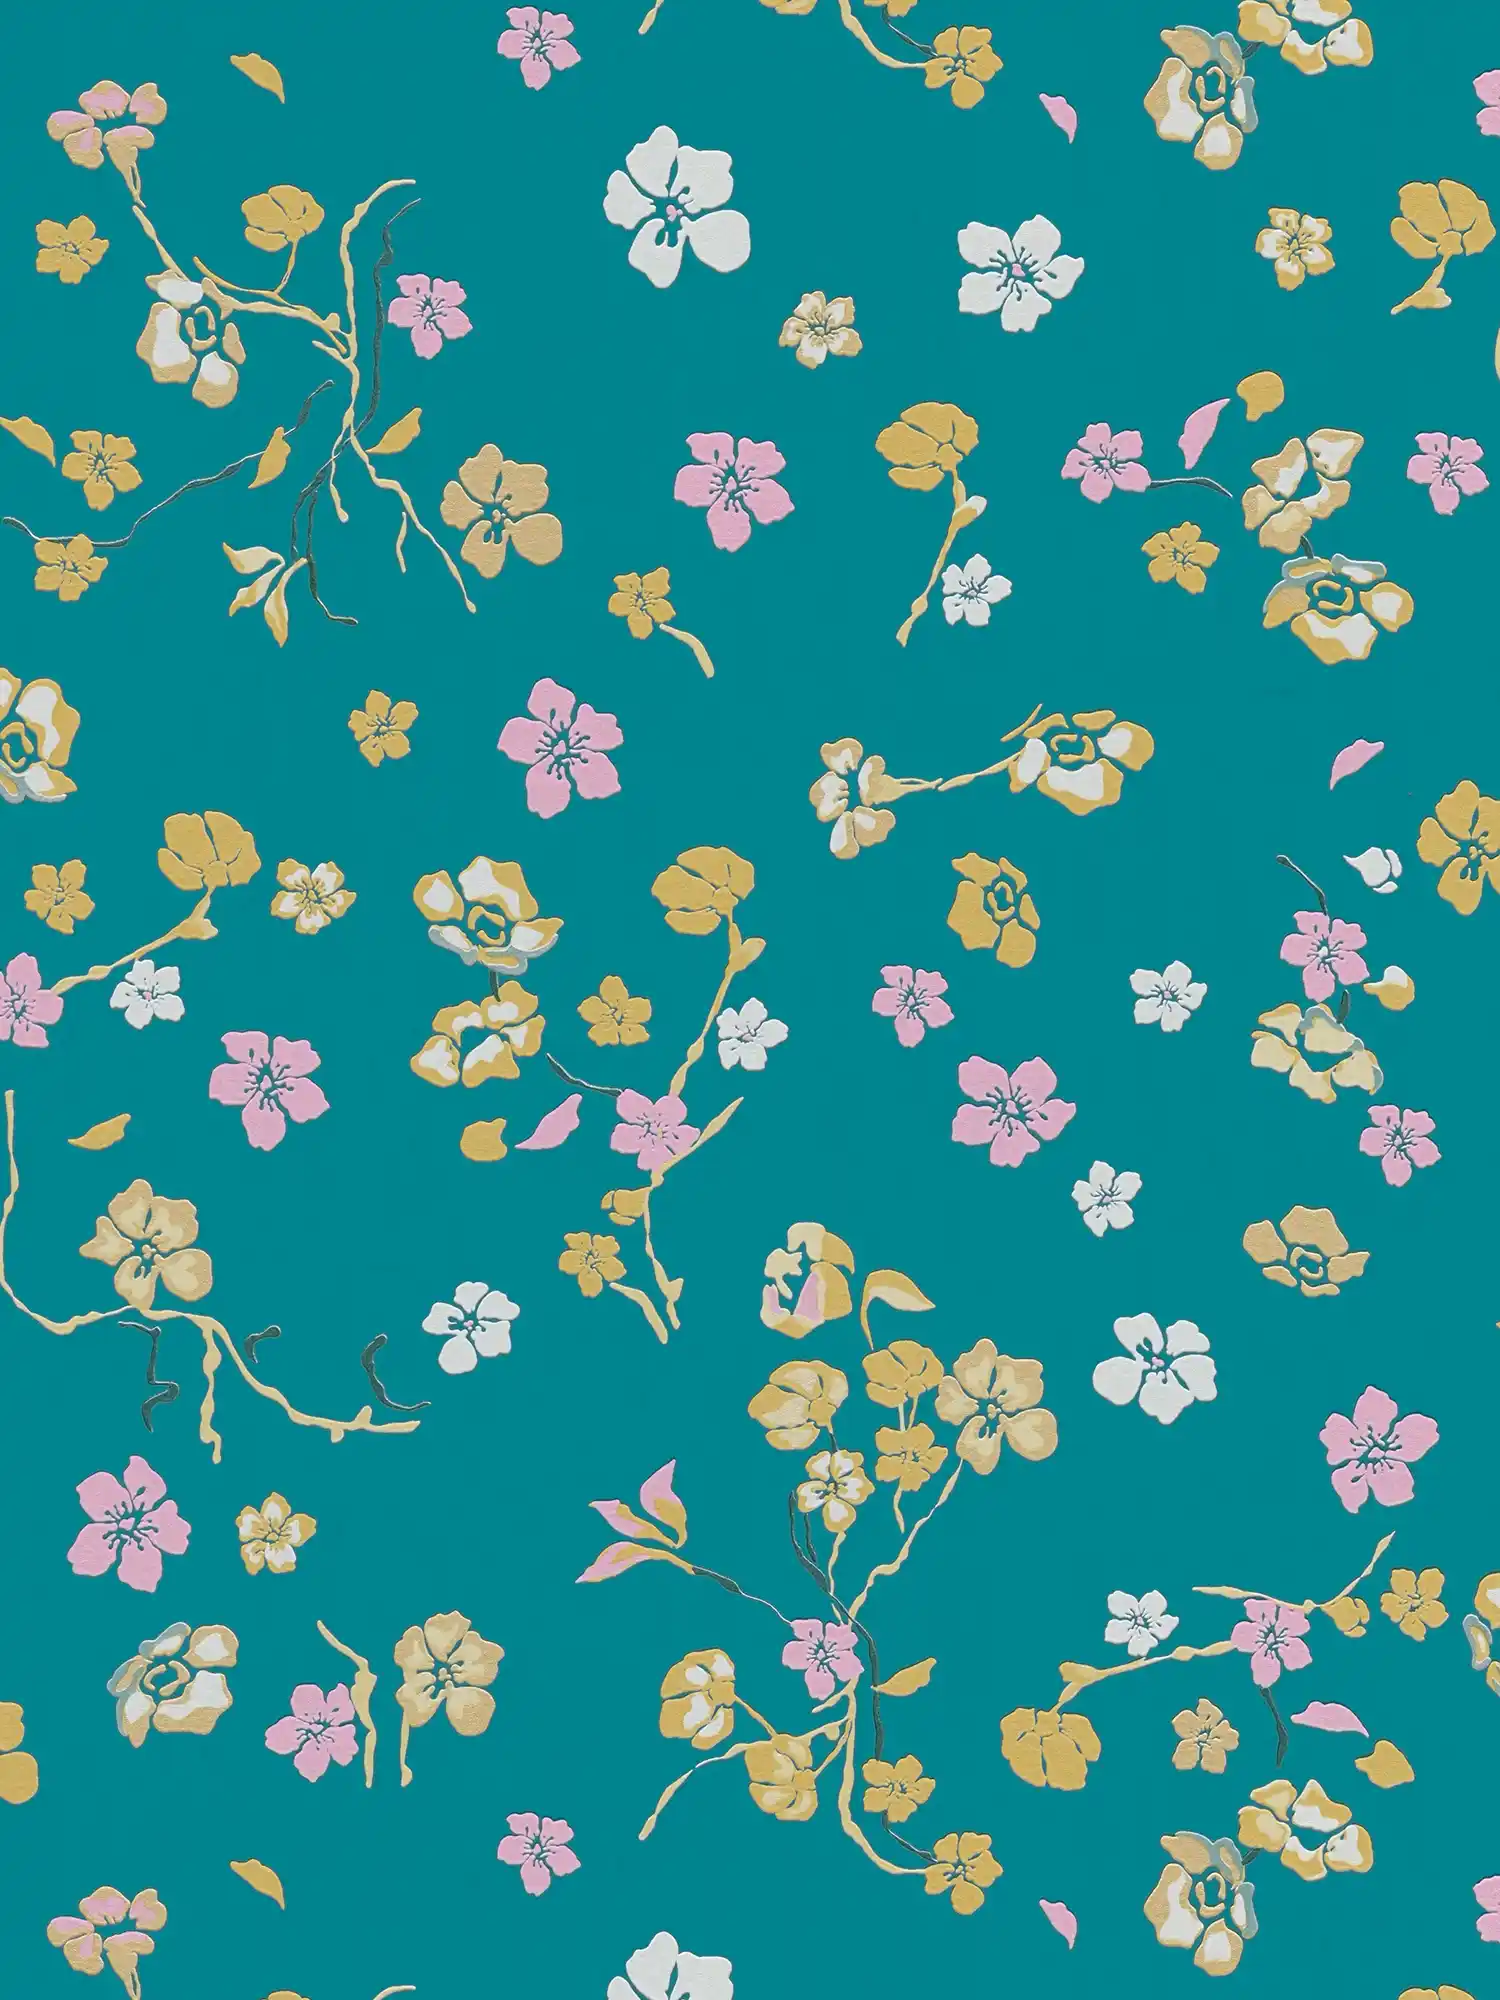 Floral wallpaper in country style with gloss - turquoise, yellow, pink
